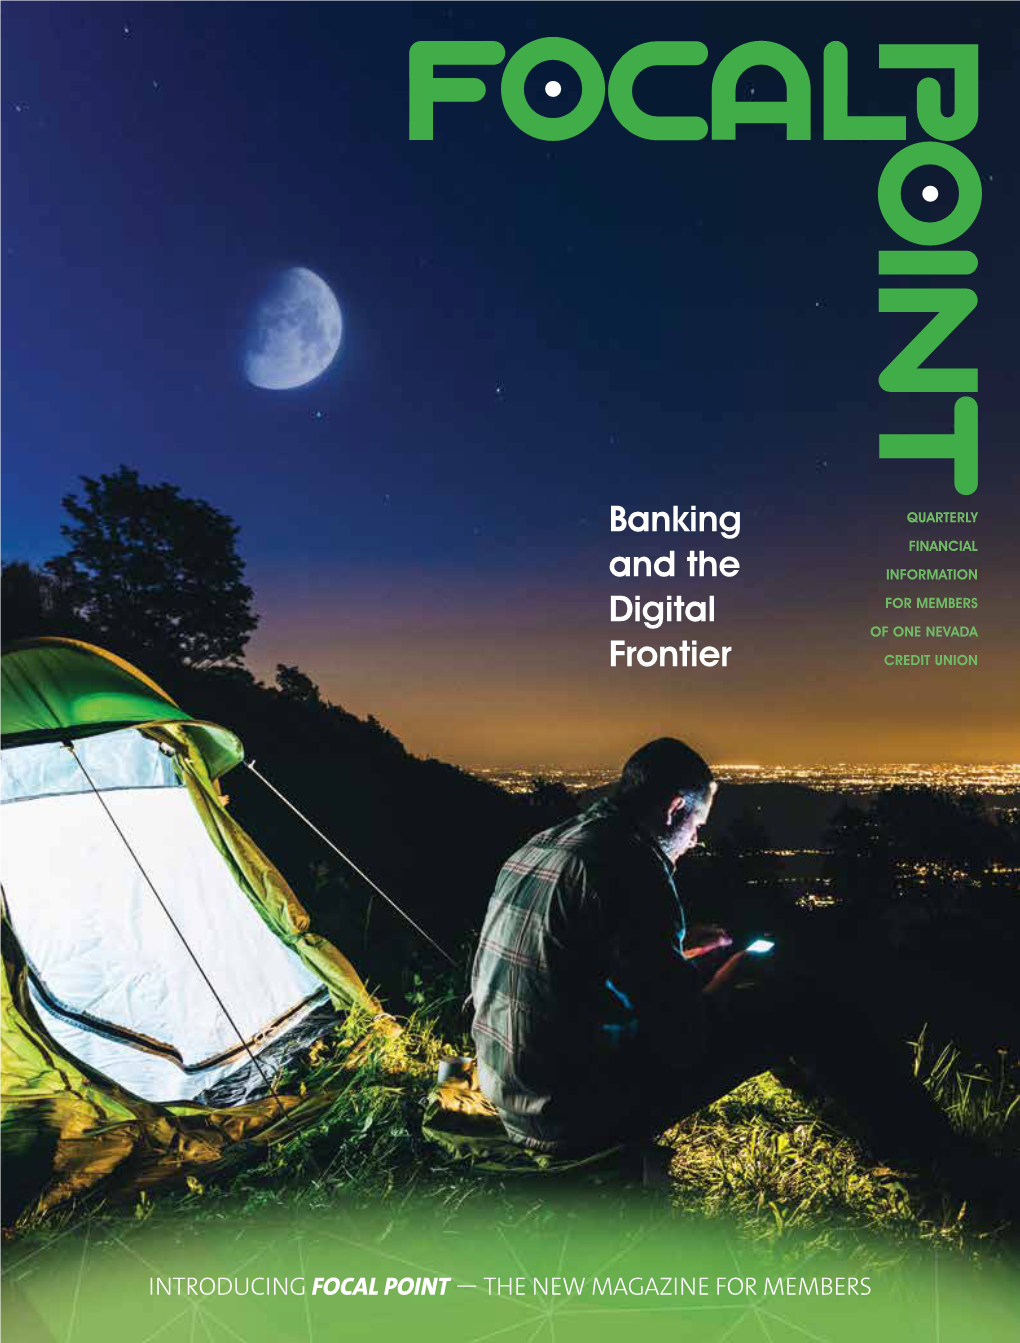 Focal Point Magazine from One Nevada Credit Union